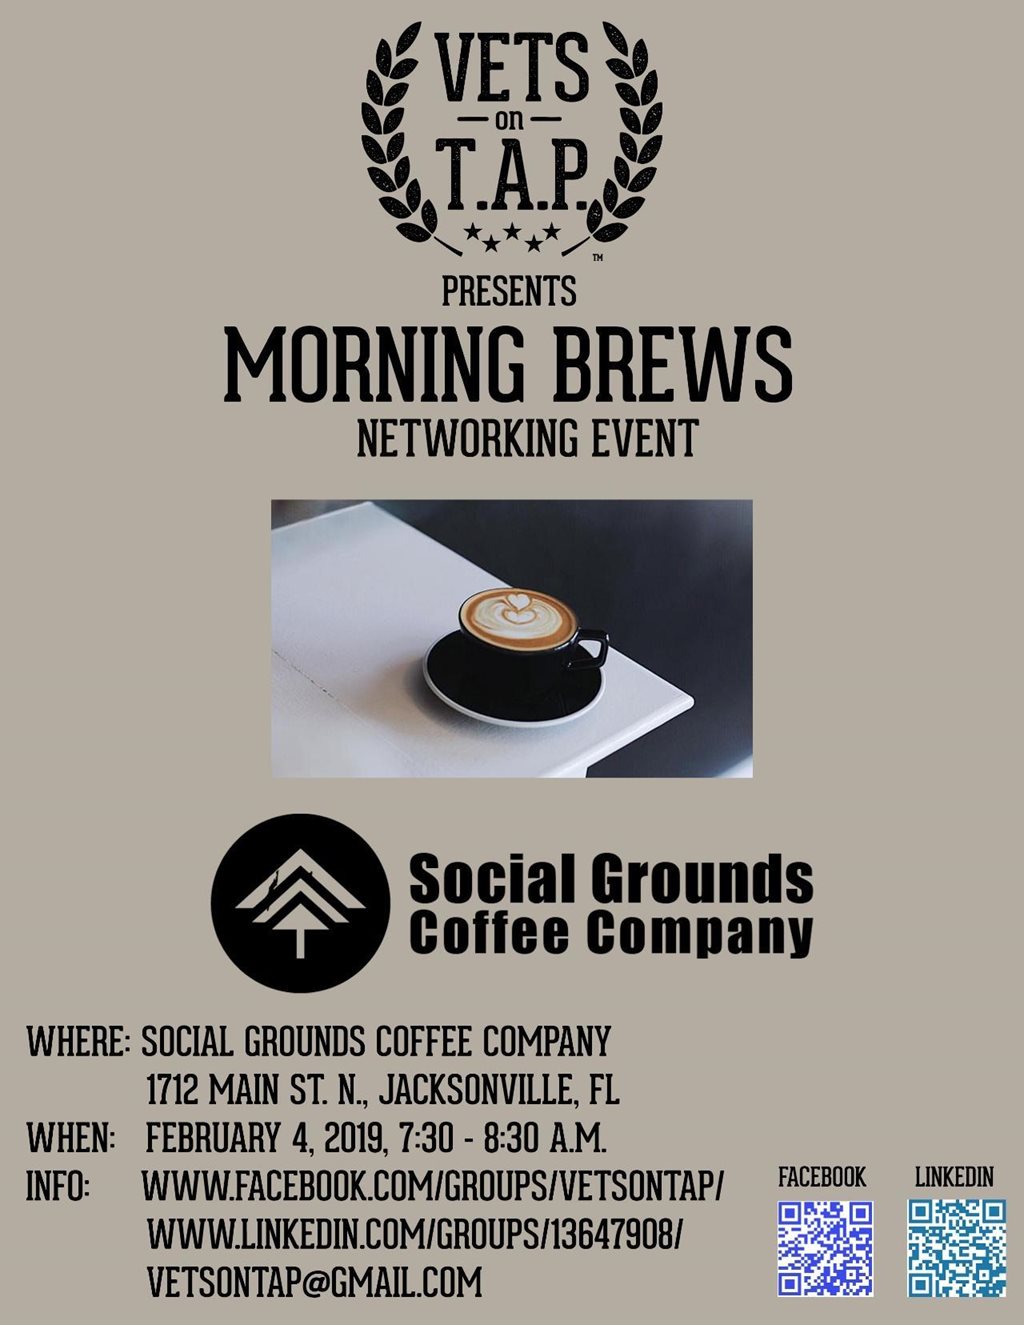 Vets on T.A.P. presents Morning Brews Networking Event on February 4th at Social Grounds Coffee Company from 7:30 am - 8:30 am.